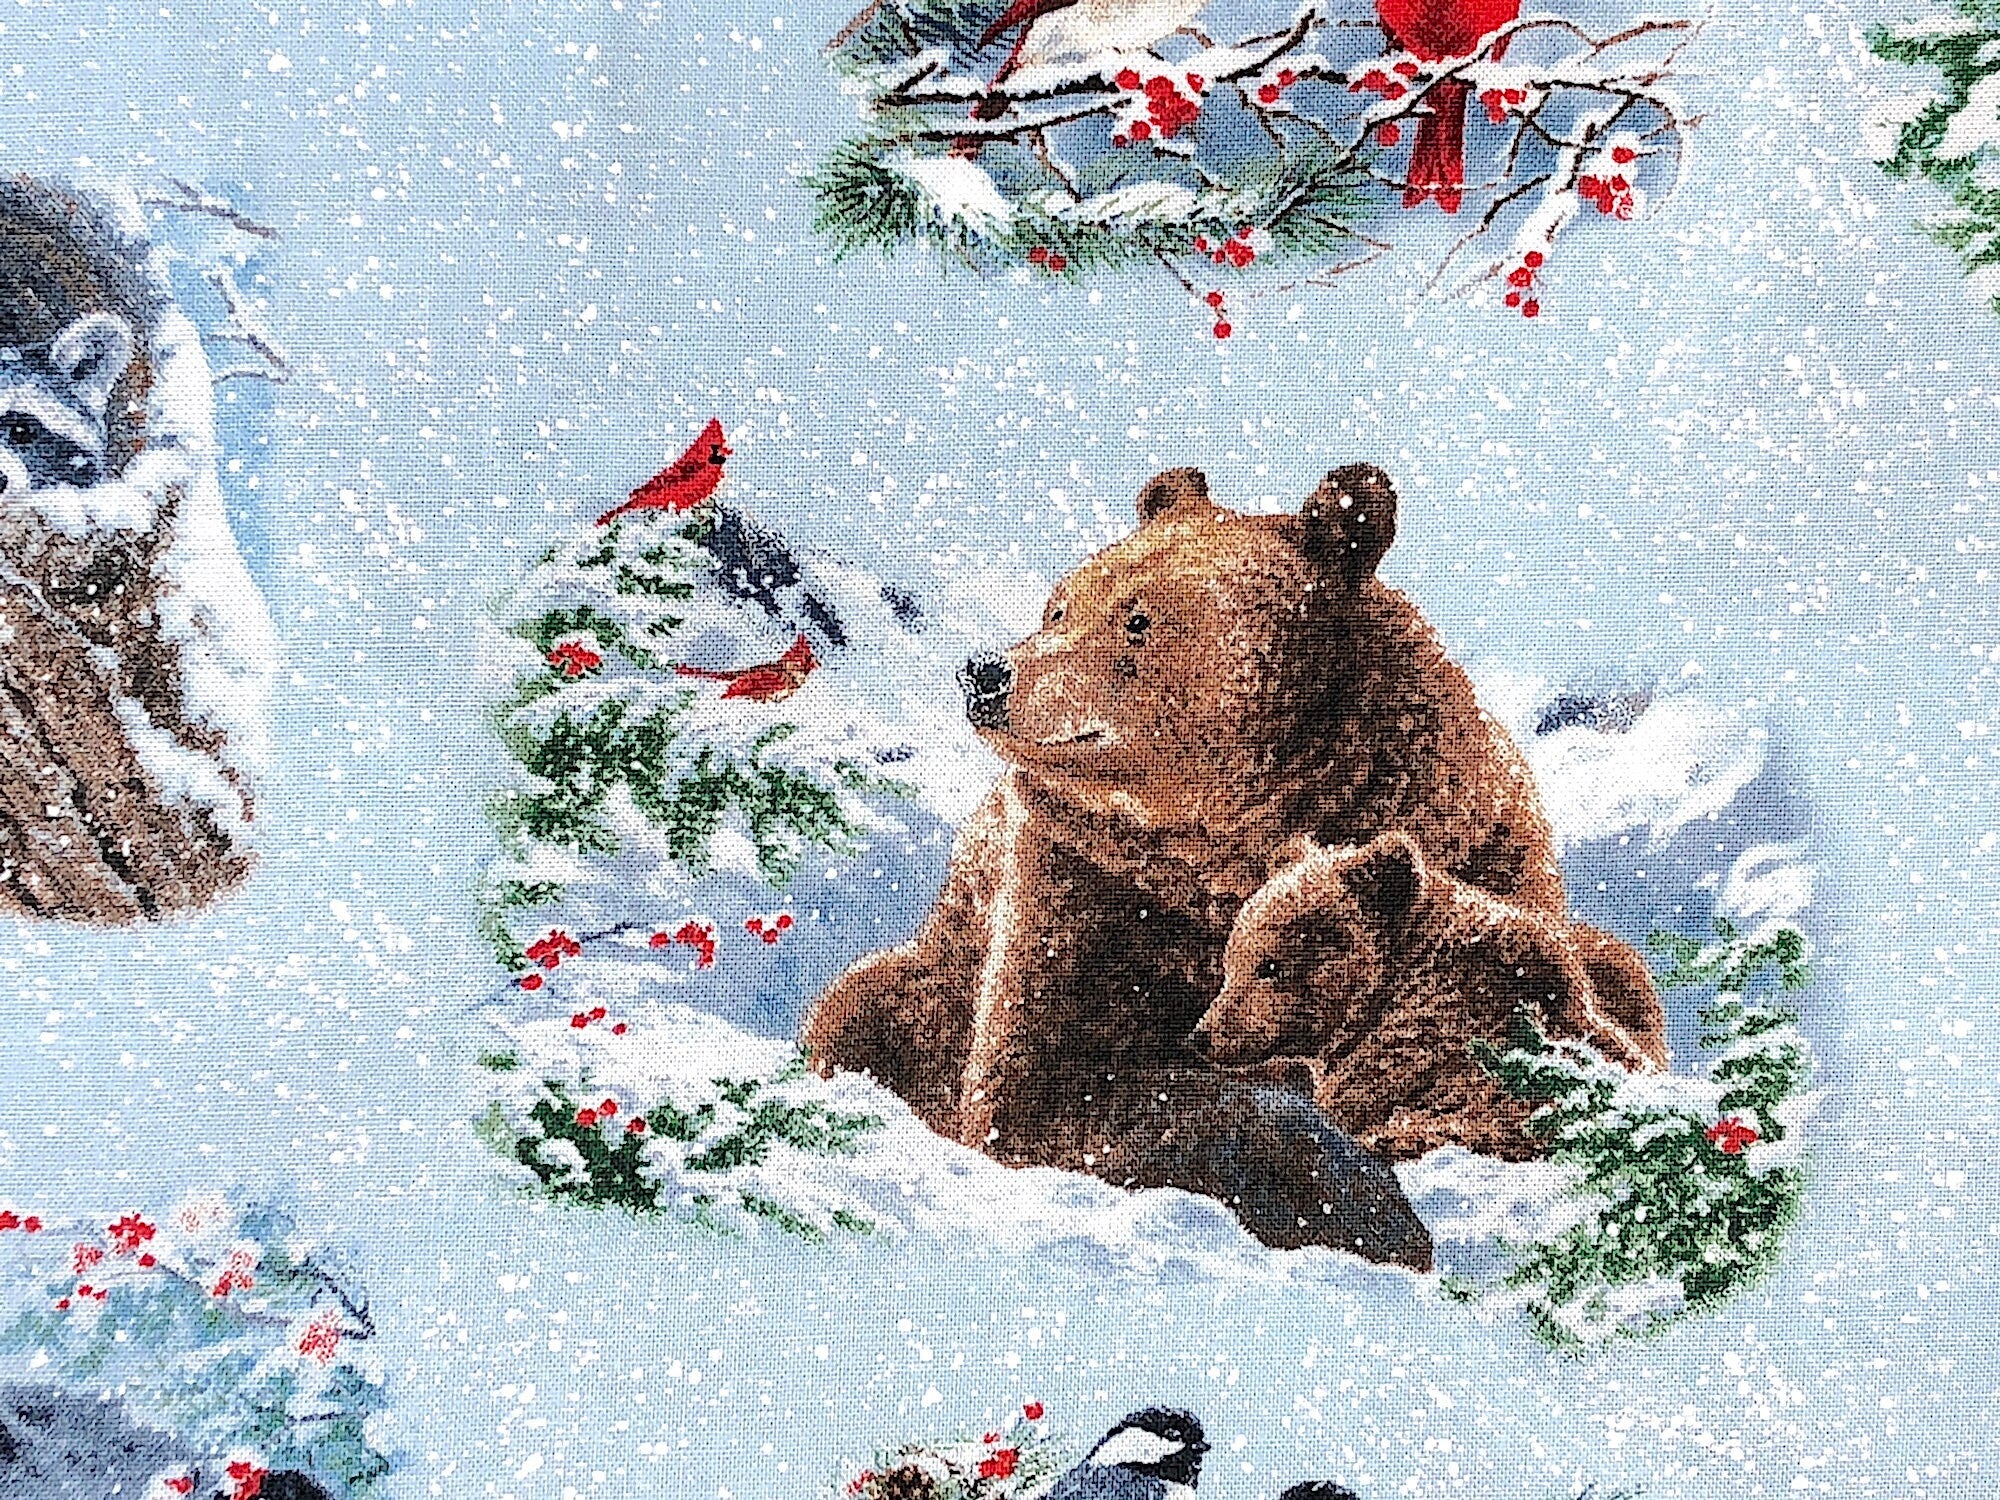 Close up of mama and baby bear in the show.  There are also red birds behind the bear.